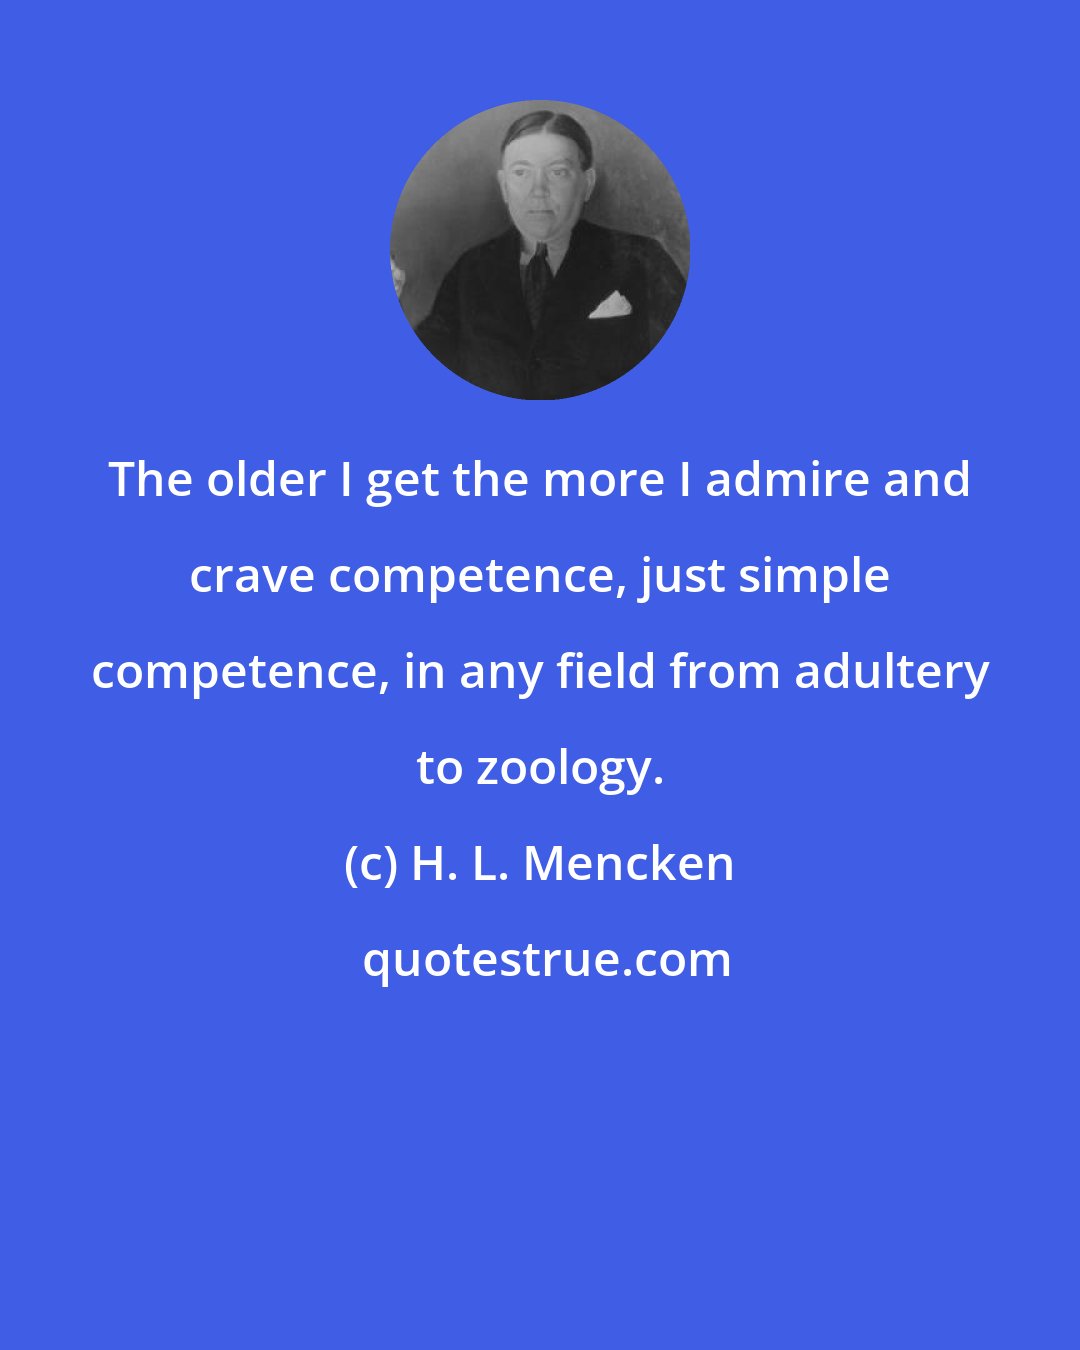 H. L. Mencken: The older I get the more I admire and crave competence, just simple competence, in any field from adultery to zoology.